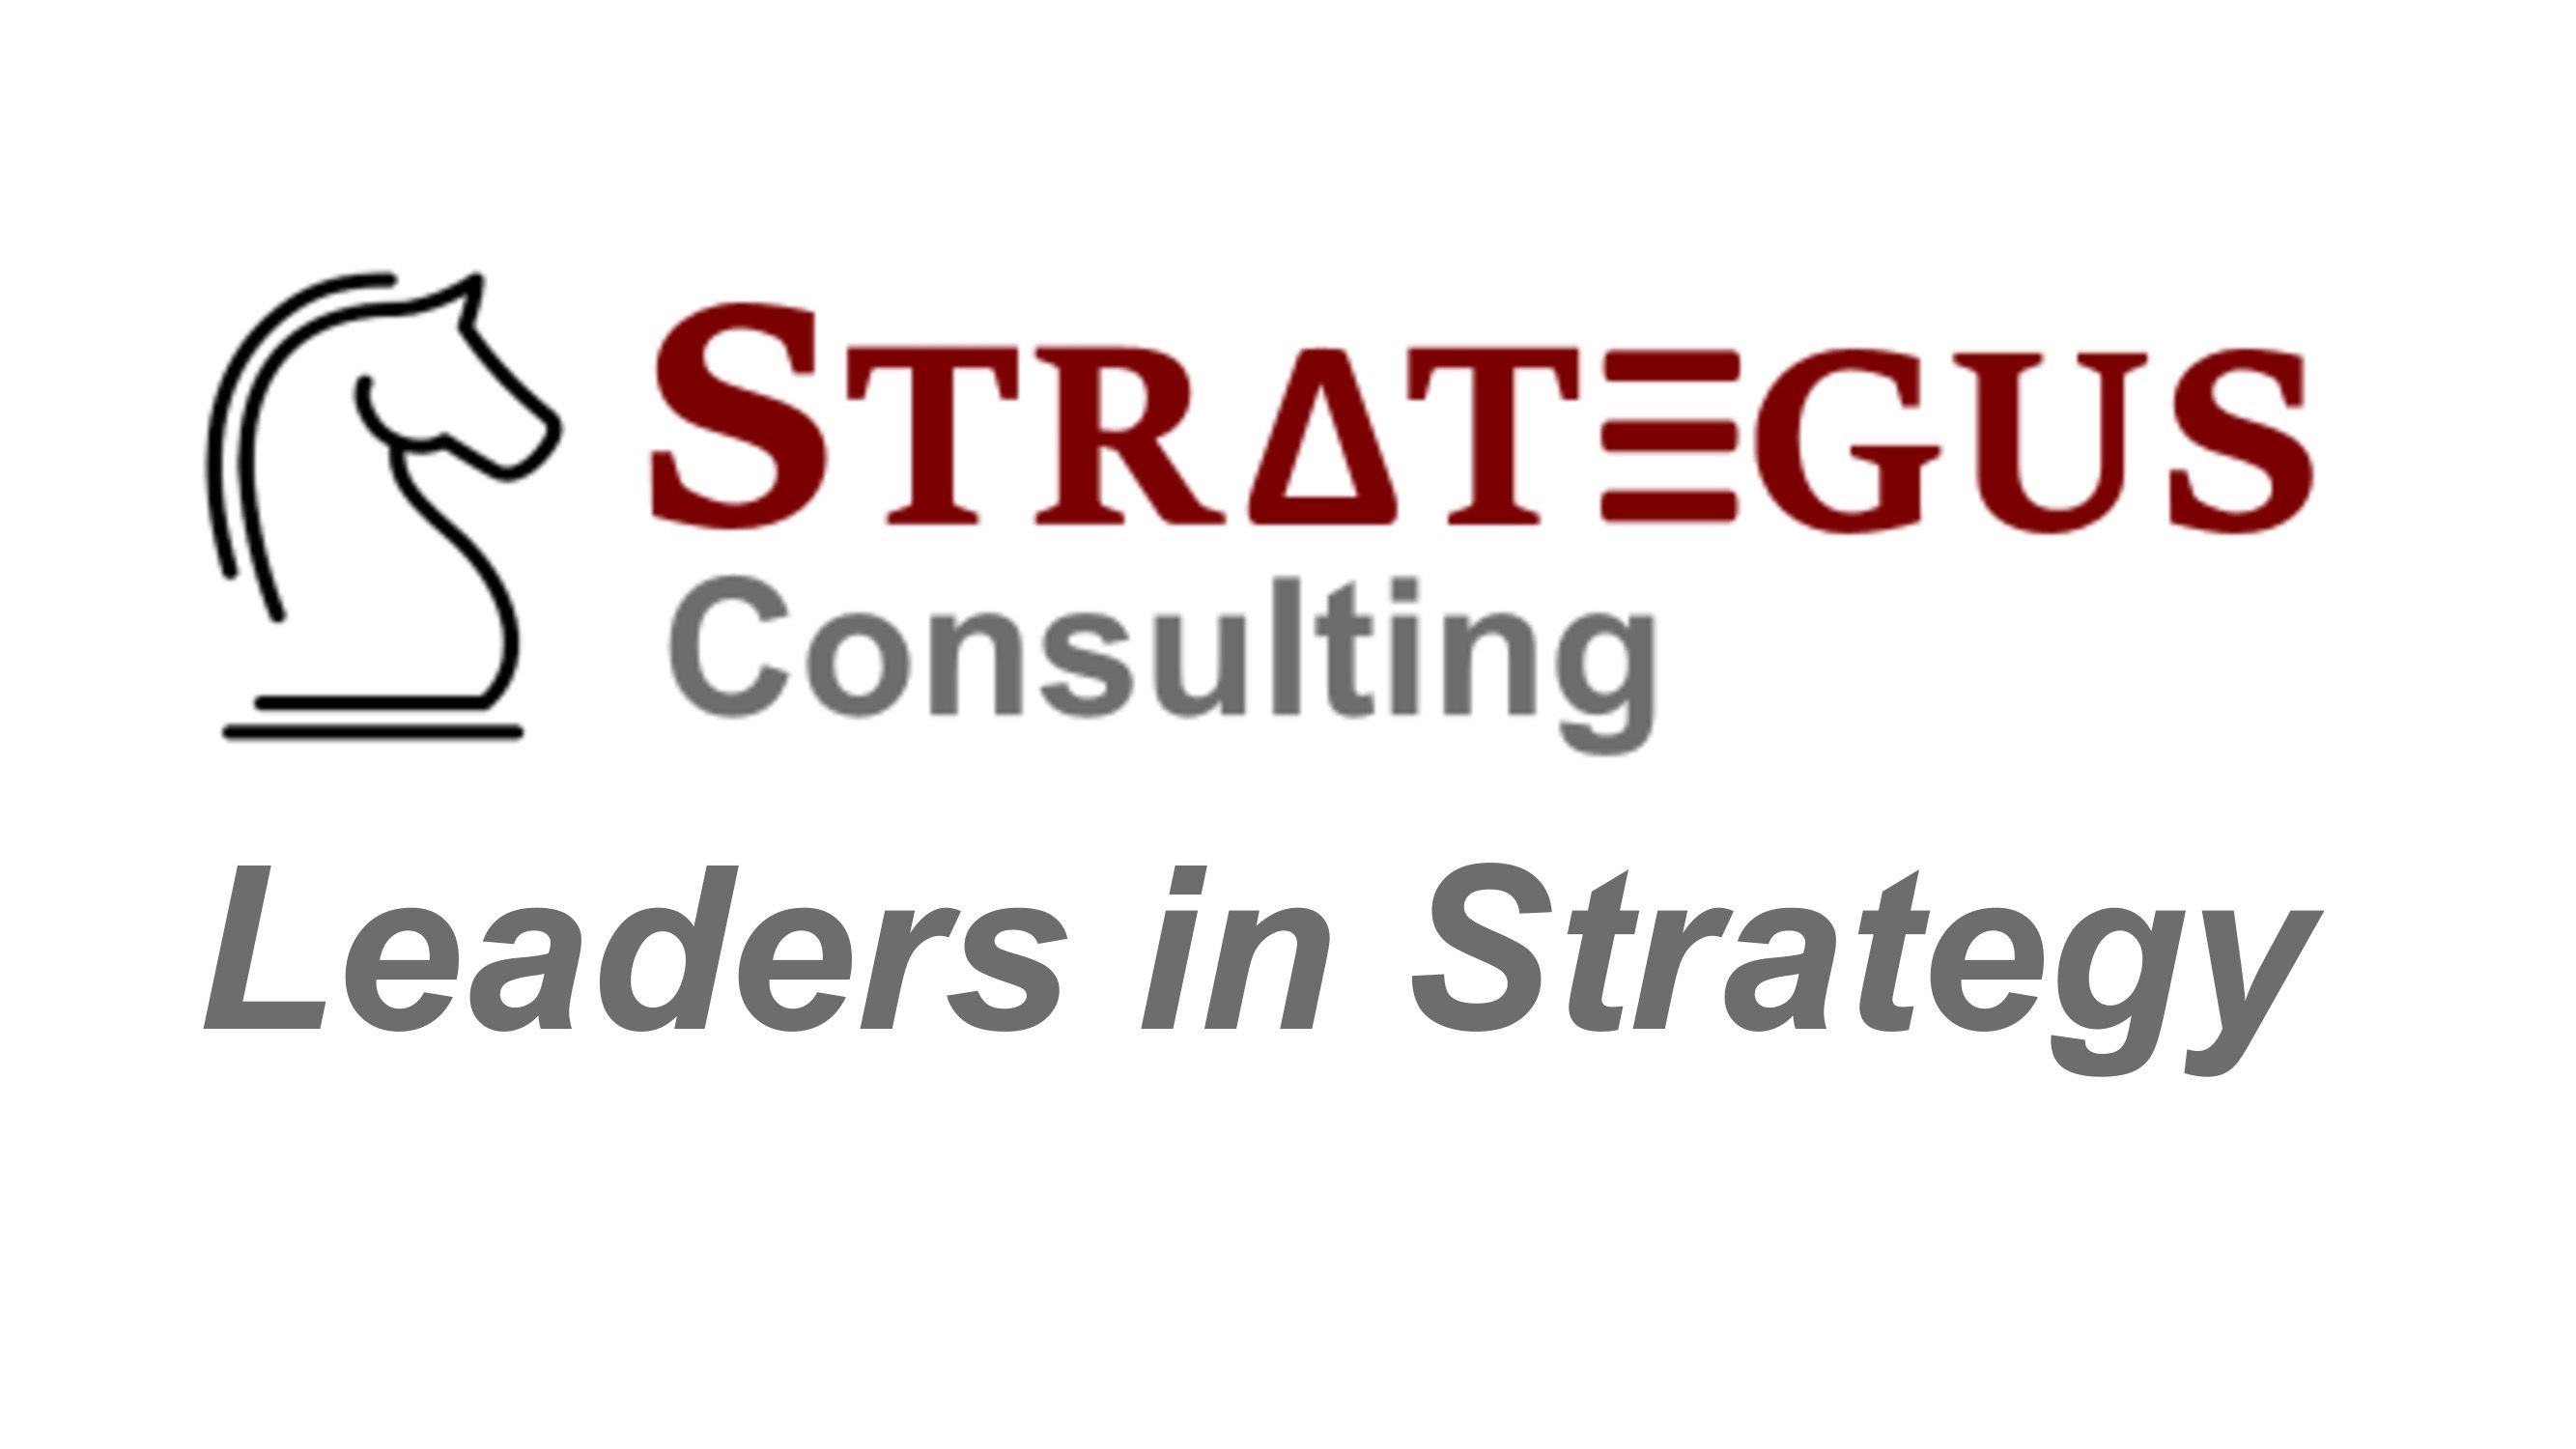 Strategus Consulting